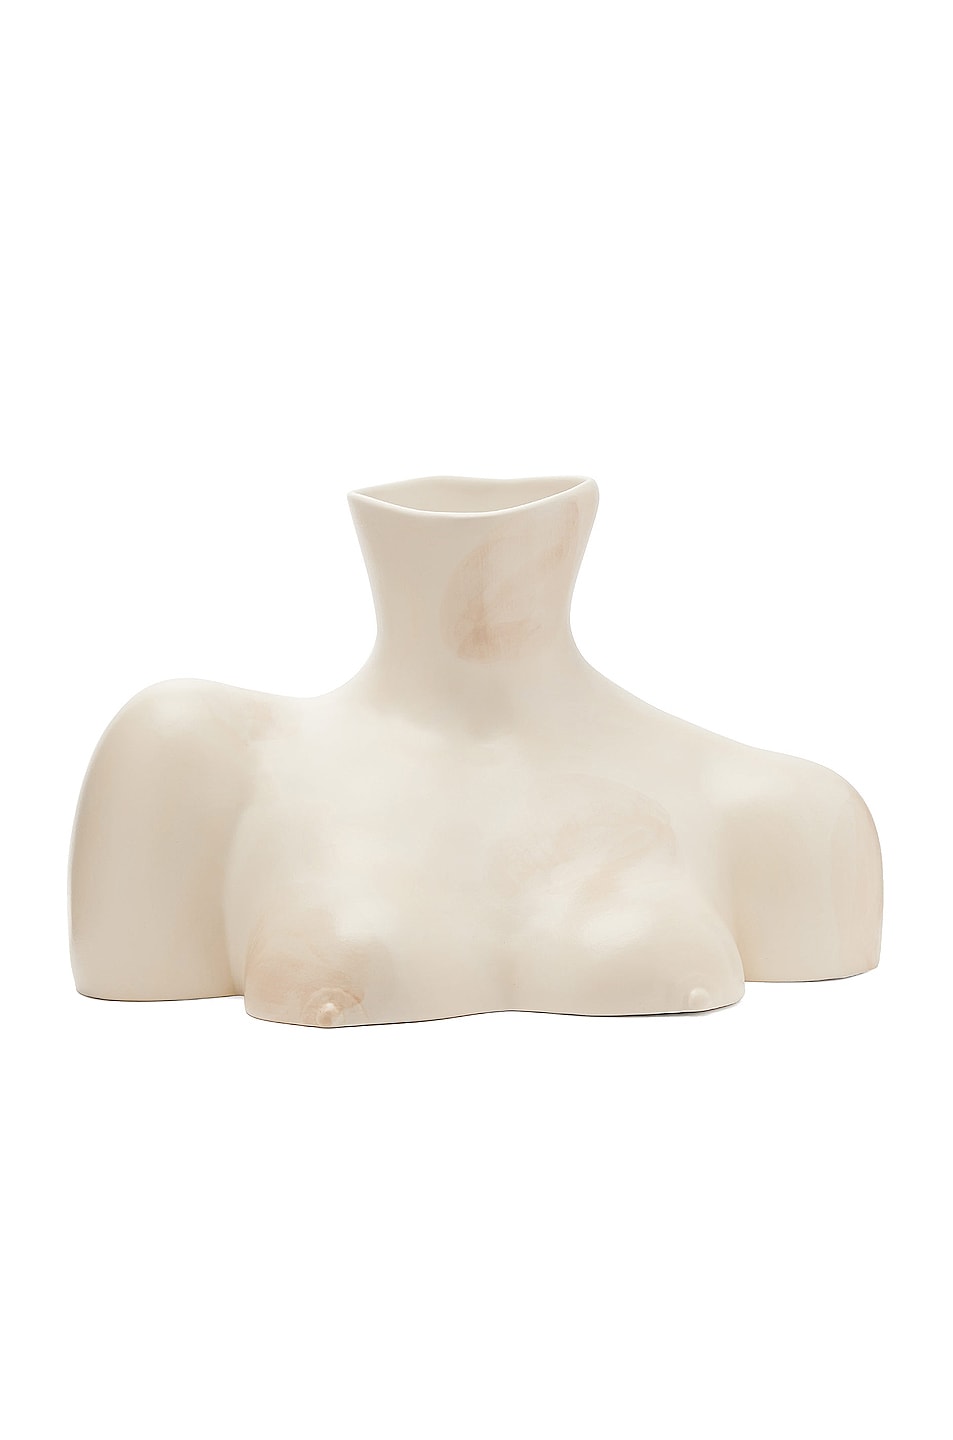 Image 1 of Anissa Kermiche Breast Friend Vase in Marble